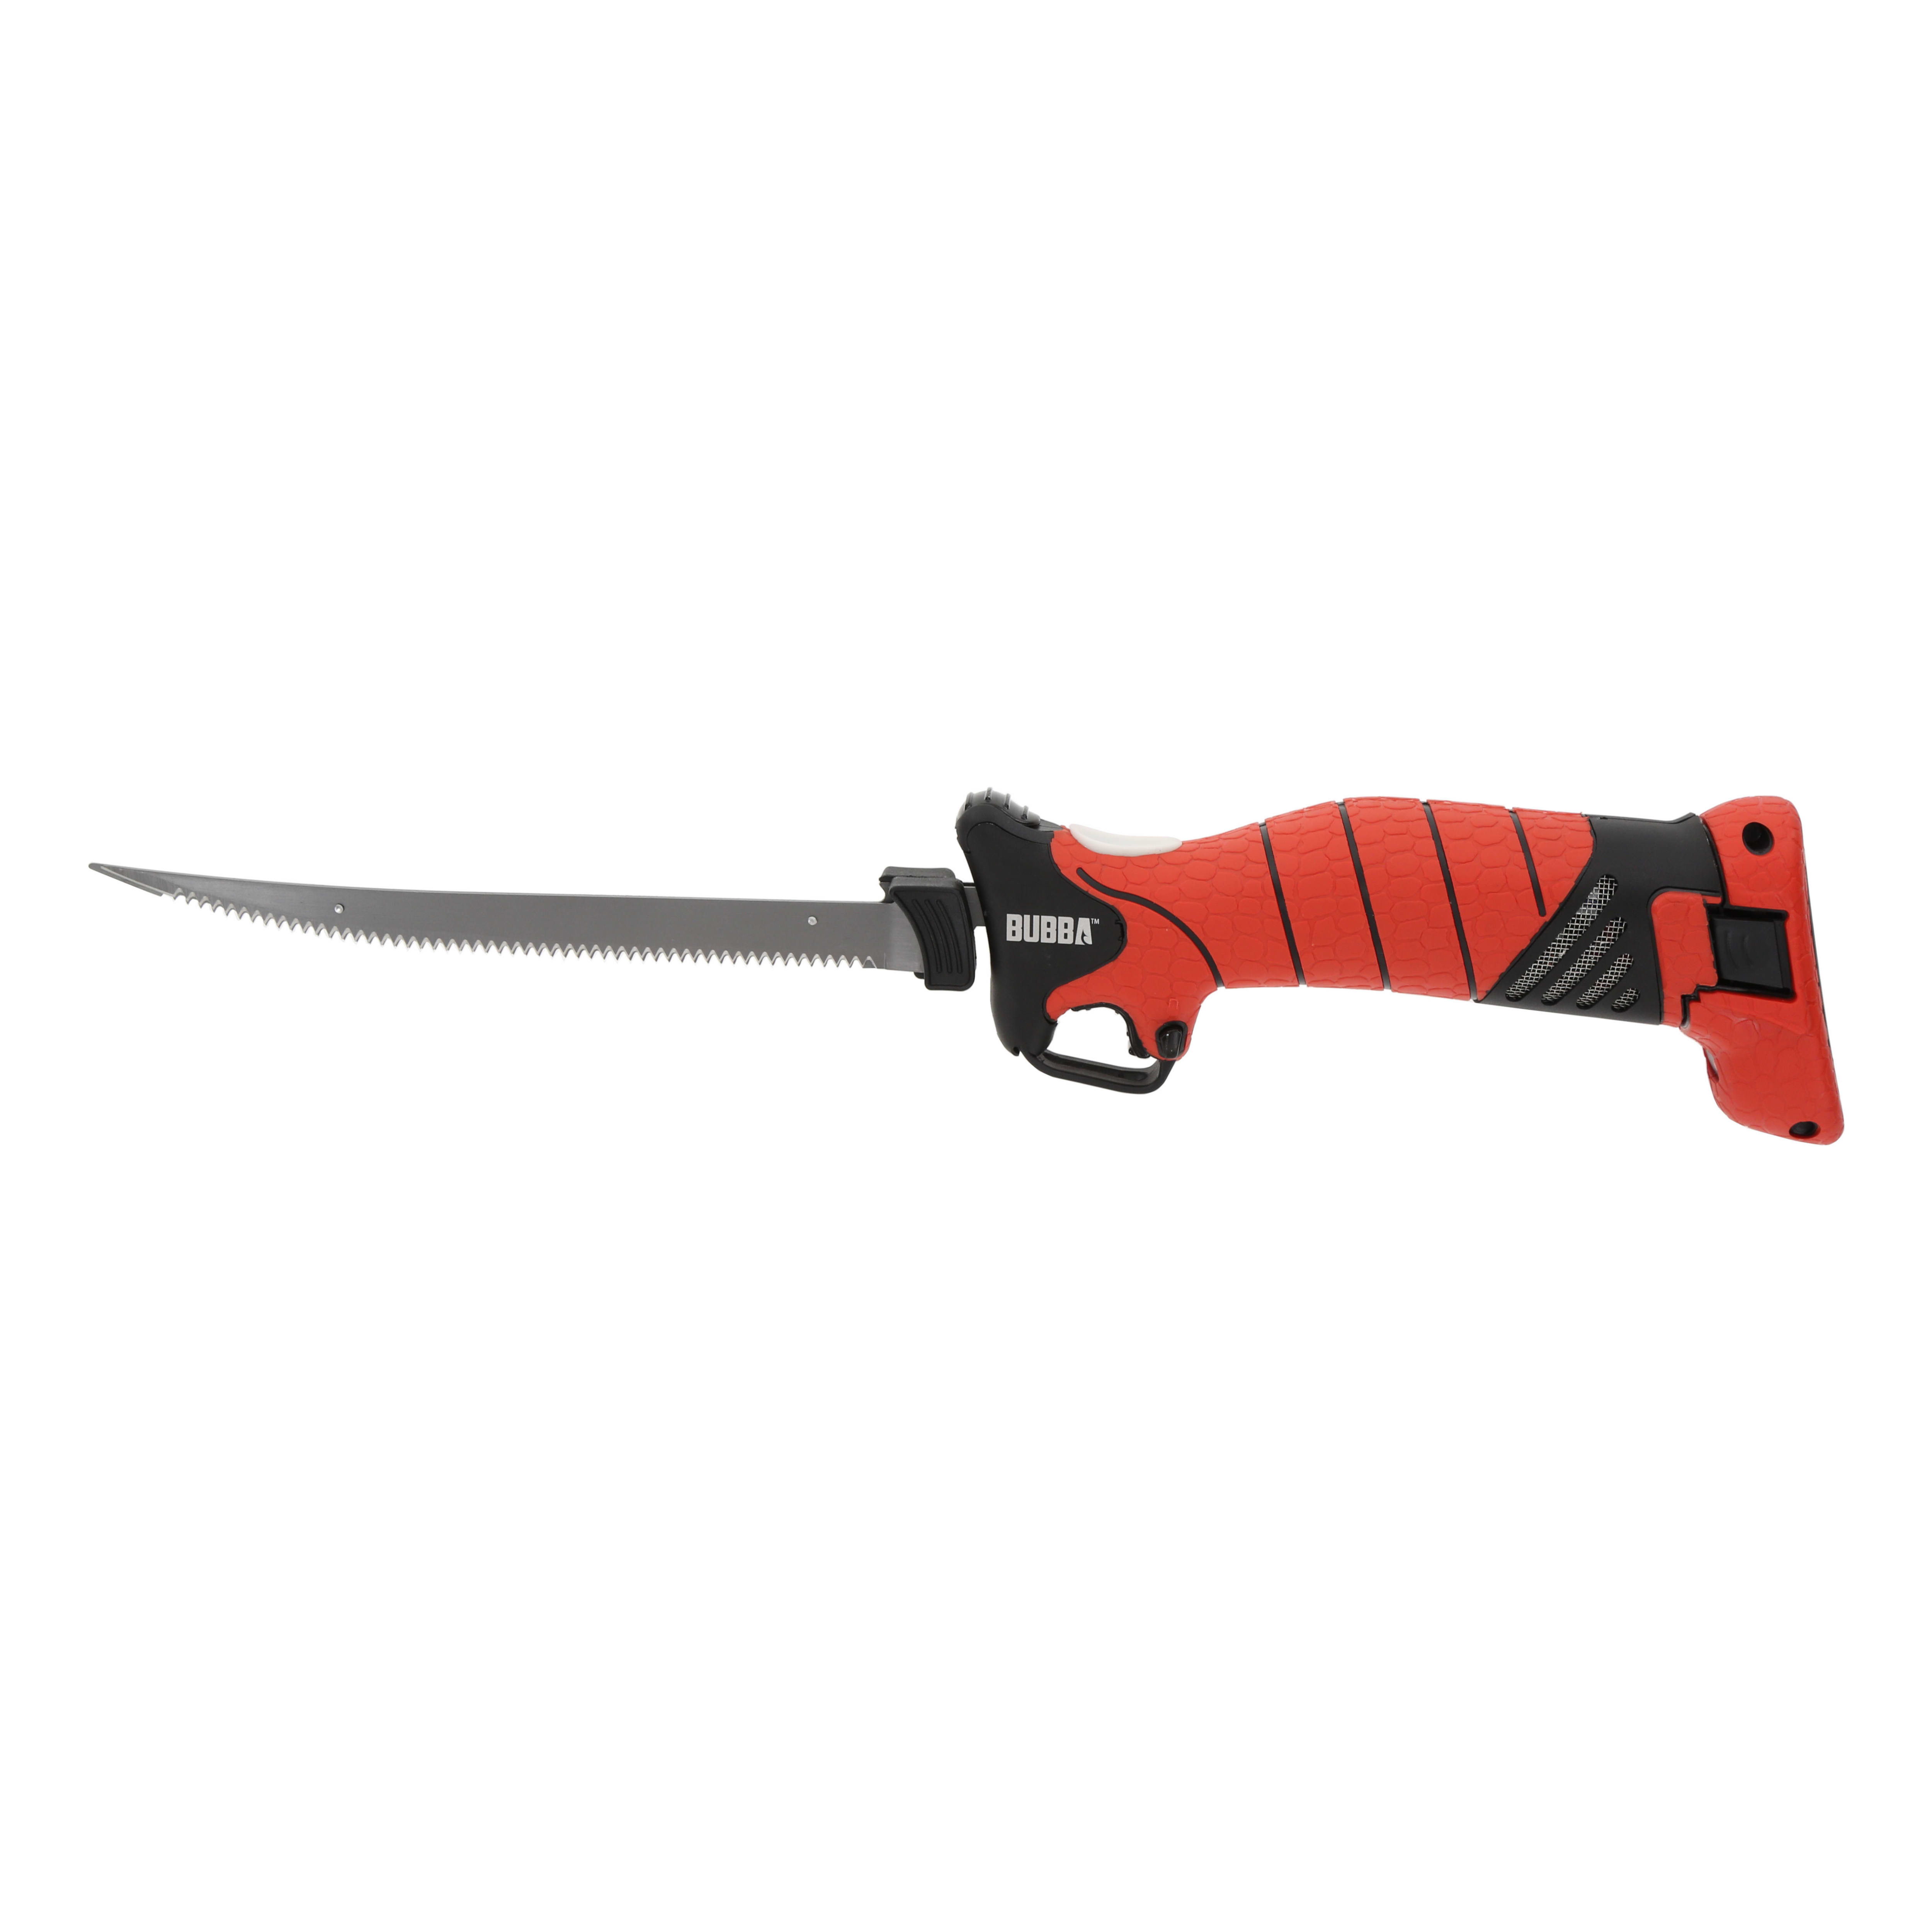 Bubba Pro Series Lithium Ion Electric Fillet Knife